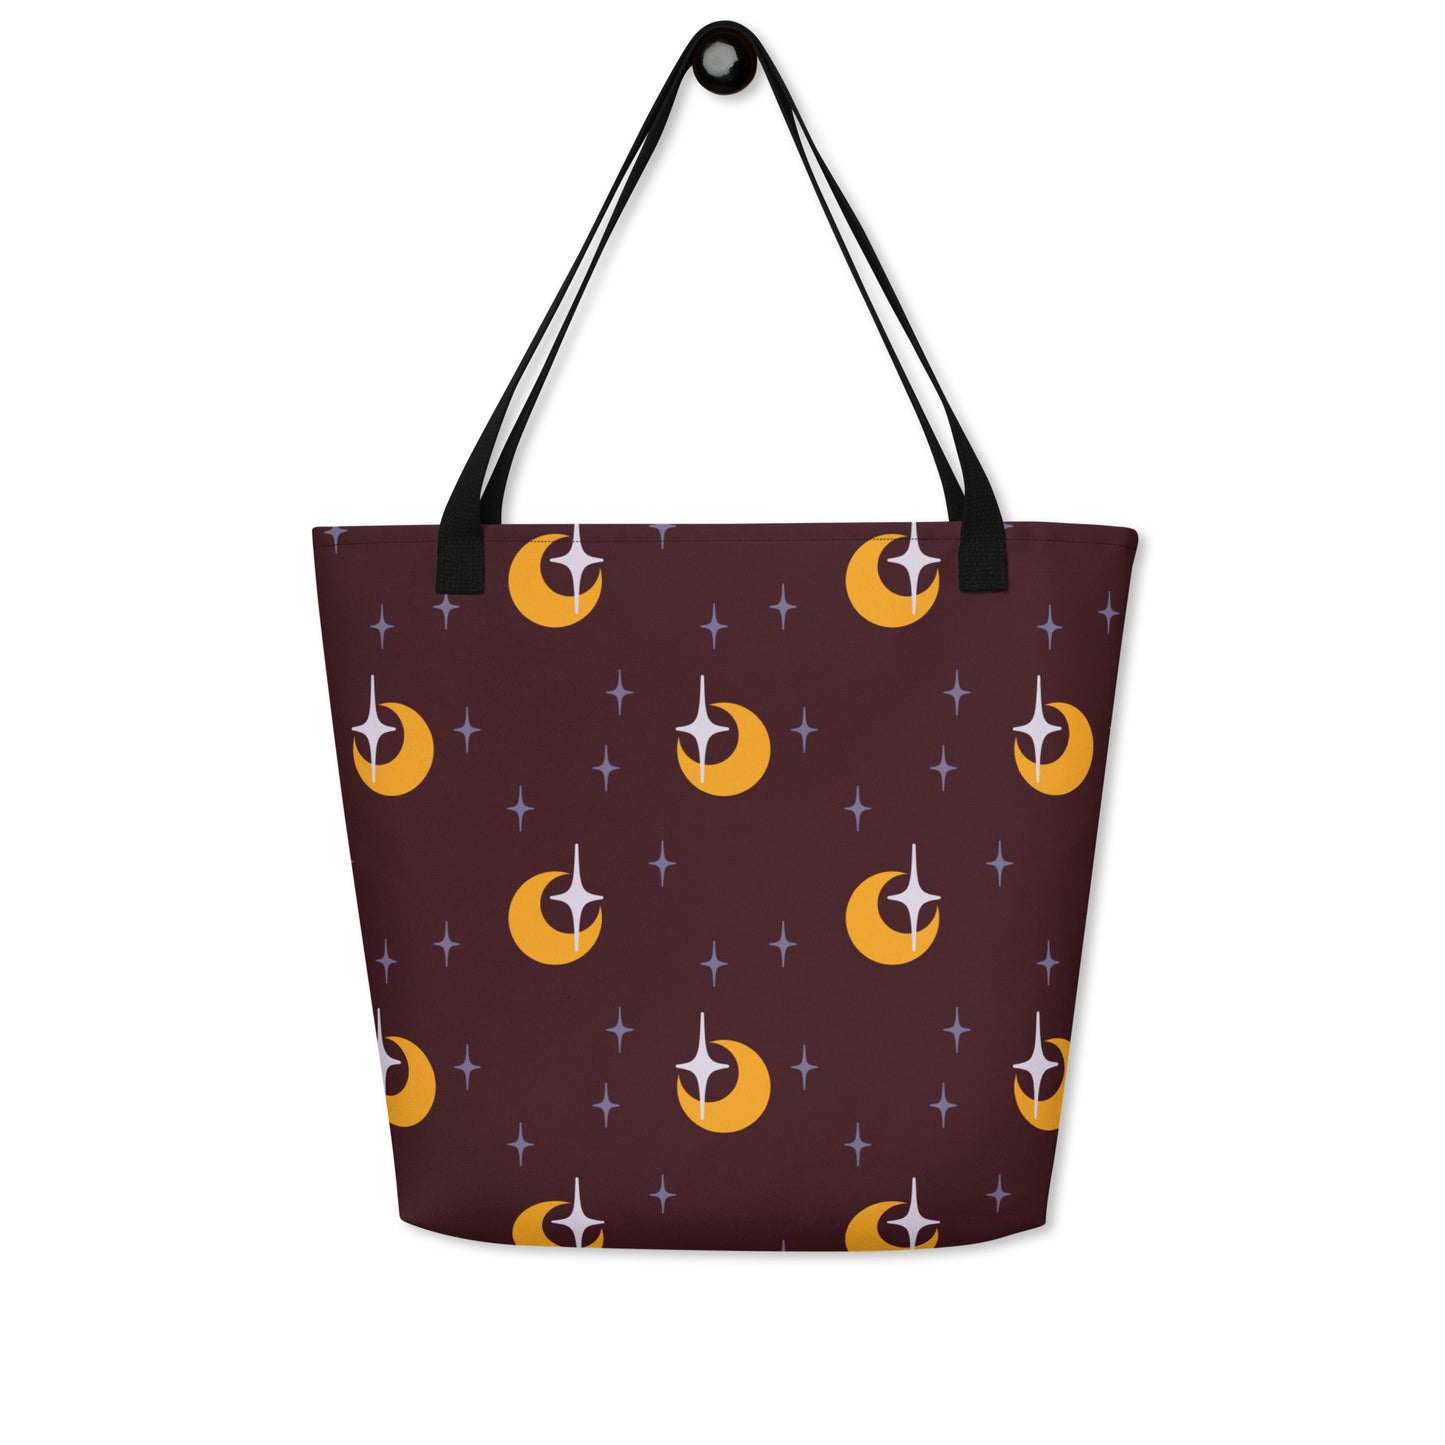 Maroon and Gold Crescent Moon Deluxe Market Tote Bag